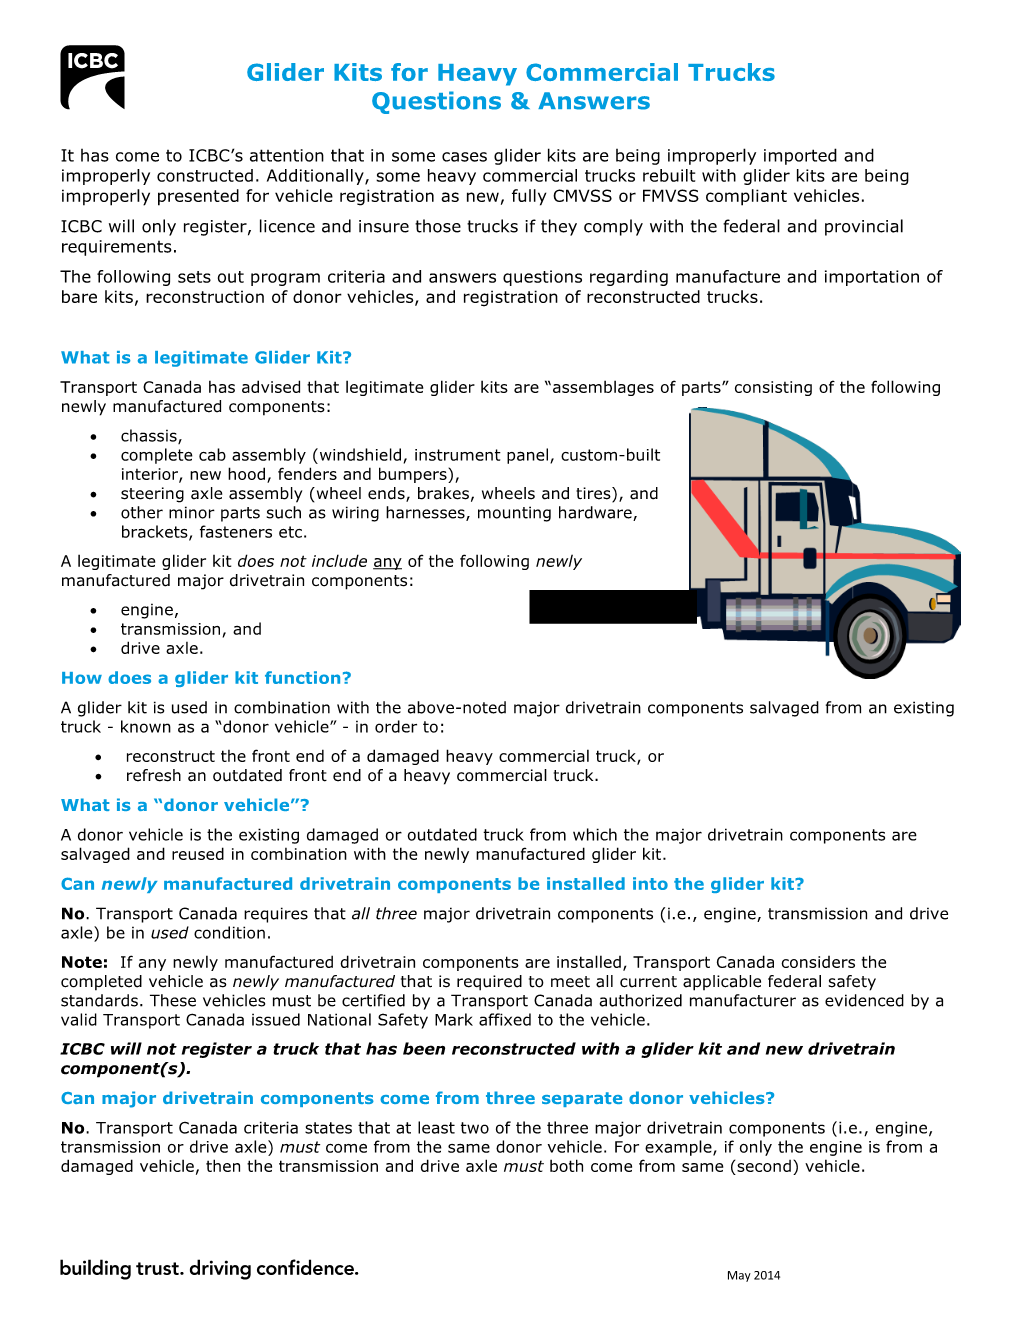 Glider Kits for Heavy Commercial Trucks Questions & Answers